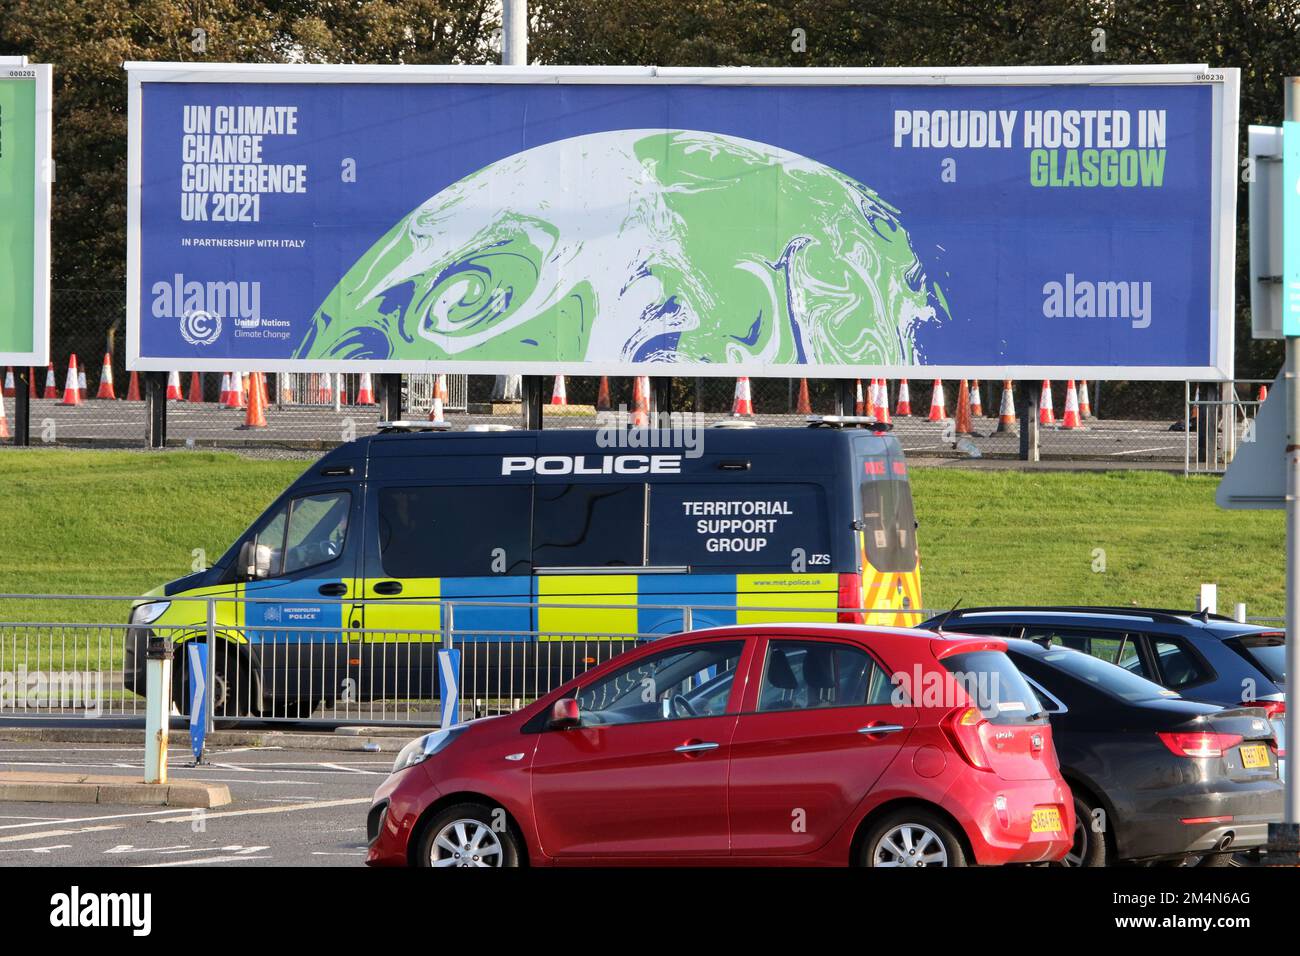 Glasgow Prestwick Airport, Prestwick, Ayrshire, Scotland, UK. Image shows large advertising hoarding promoting the UK Climate Change conference being held in Glasgow 2021. Known as COP 26. A Police van passes in front of he hoarding Stock Photo